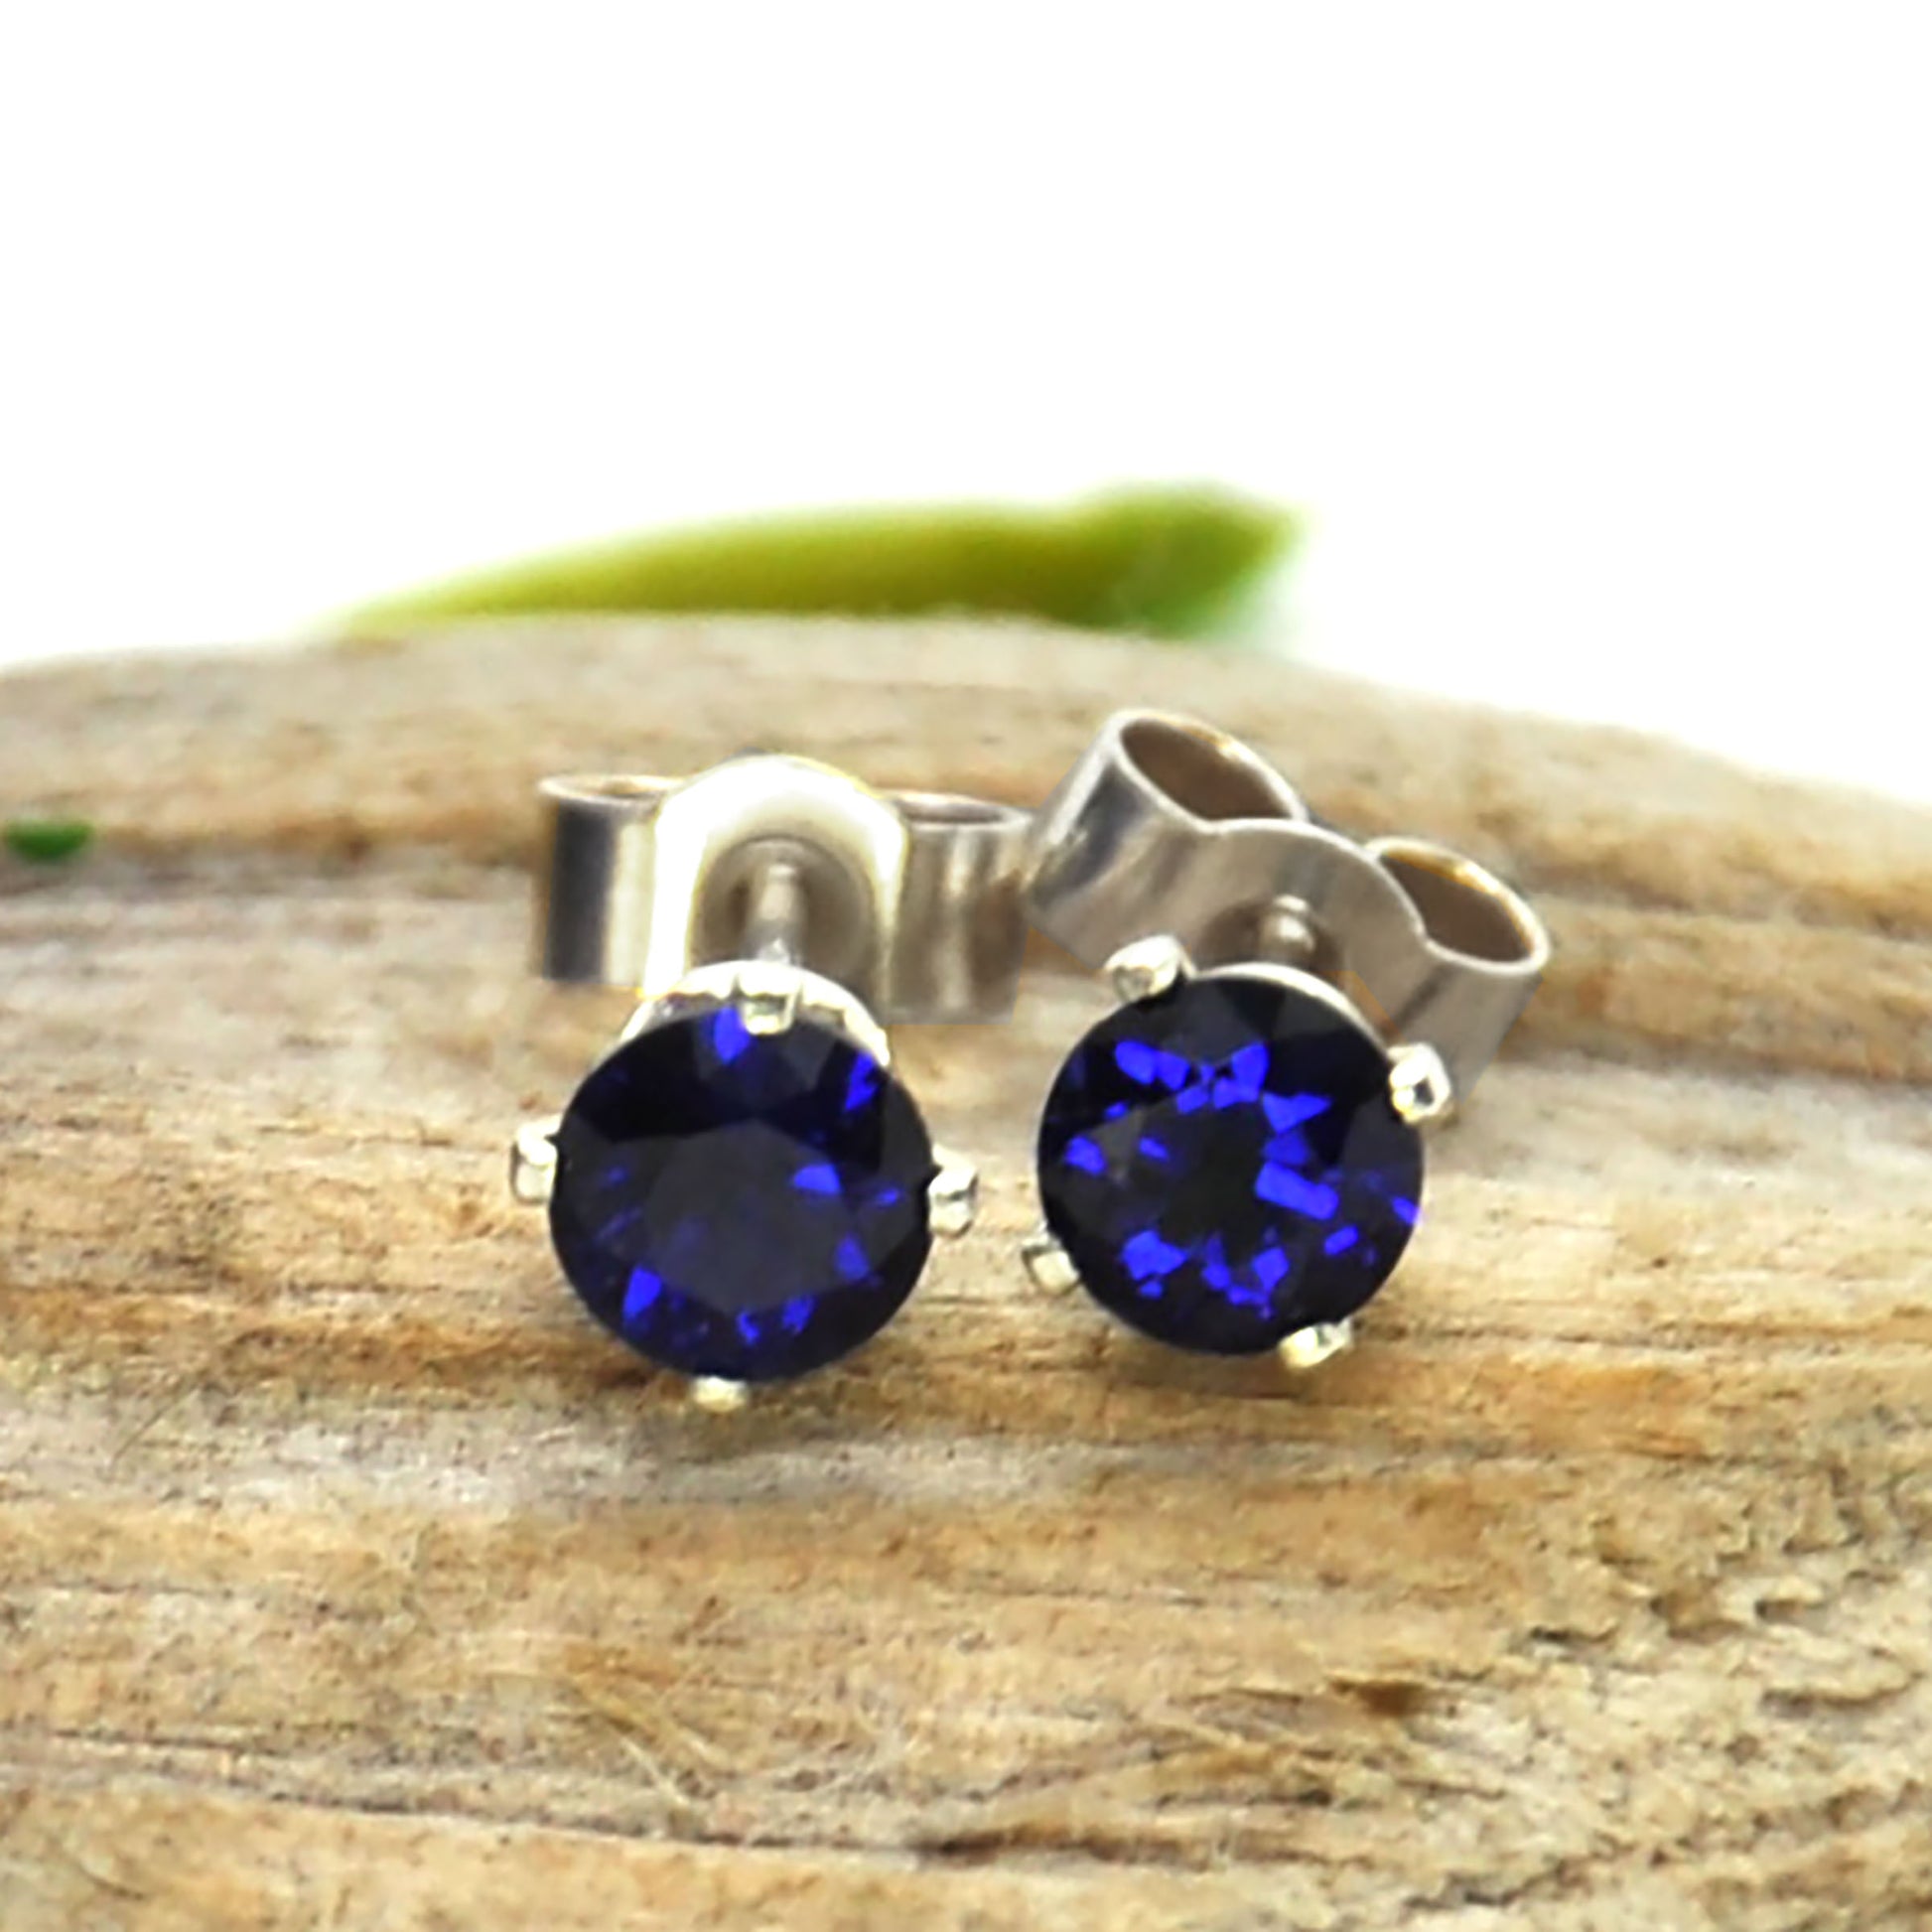 Silver 4 claw stud earrings set with dark blue sapphires. On wood. 4mm